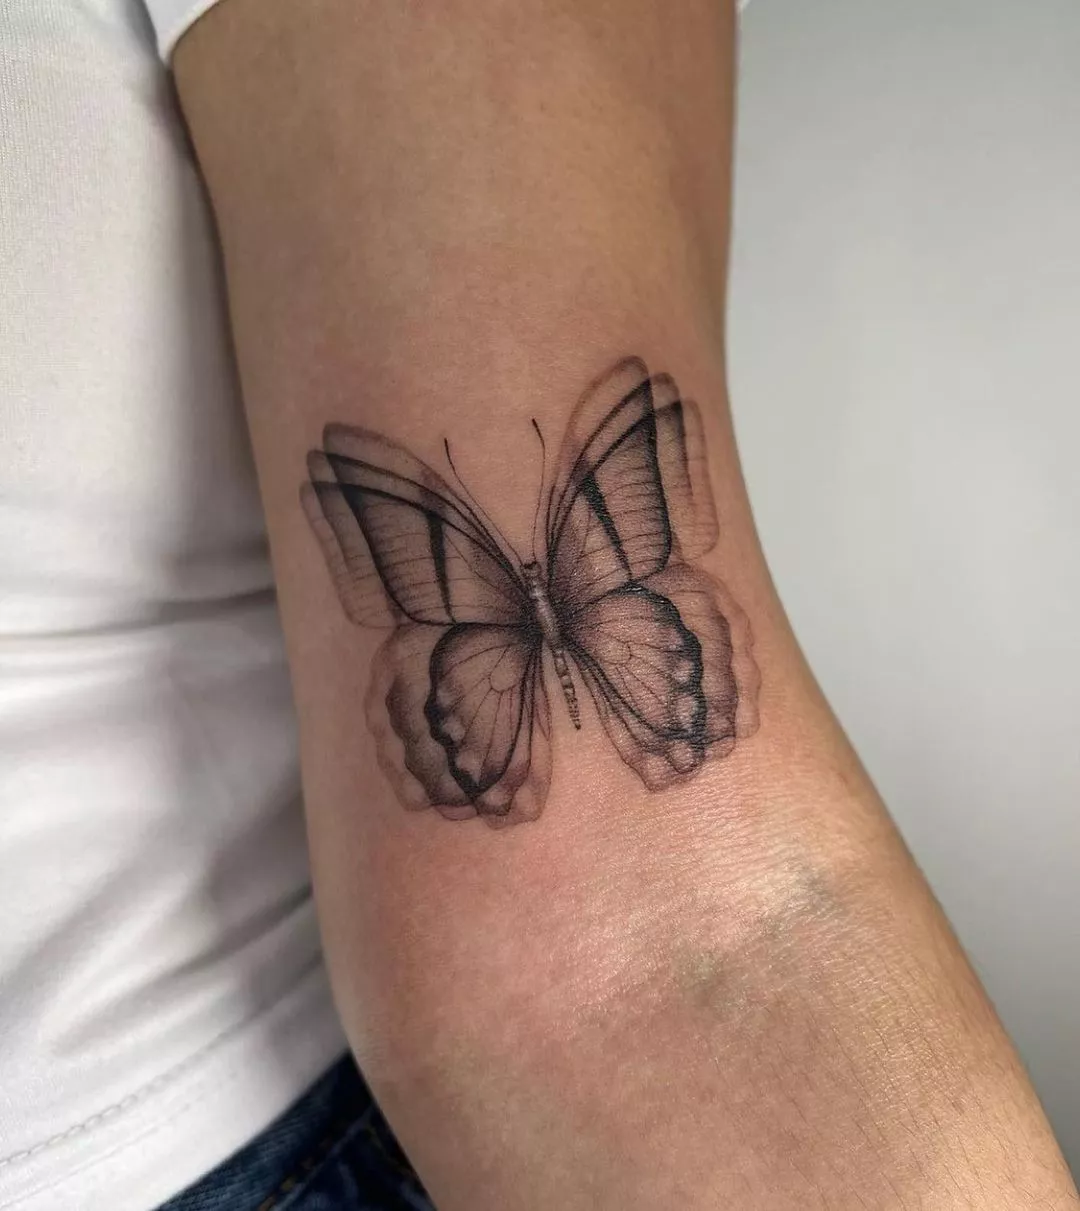 Close up of an arm with a butterfly tattoo that looks like the wings are flapping